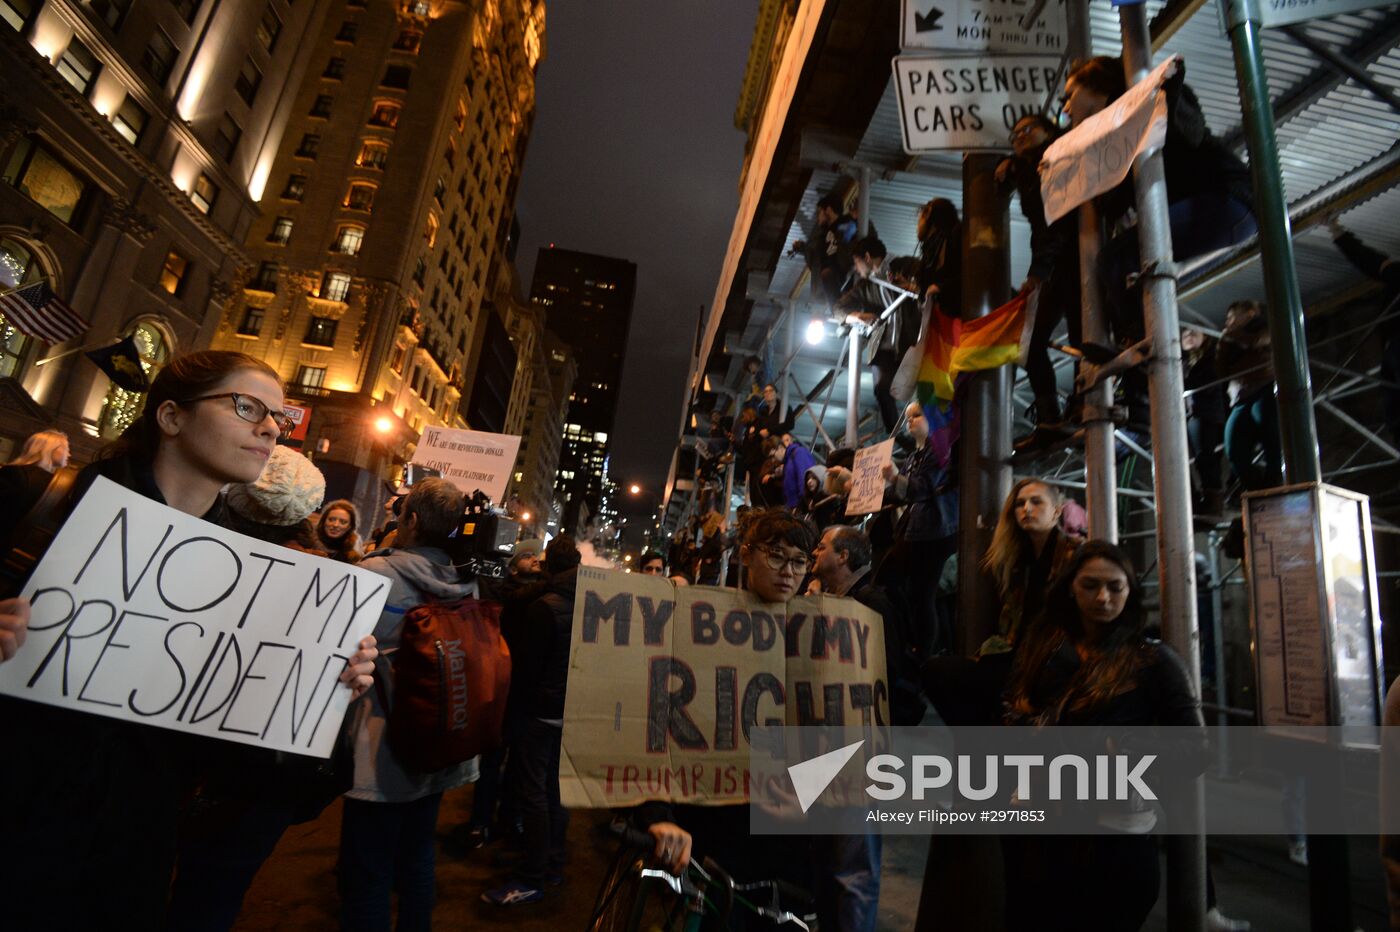 Protest against Donald Trump in New York